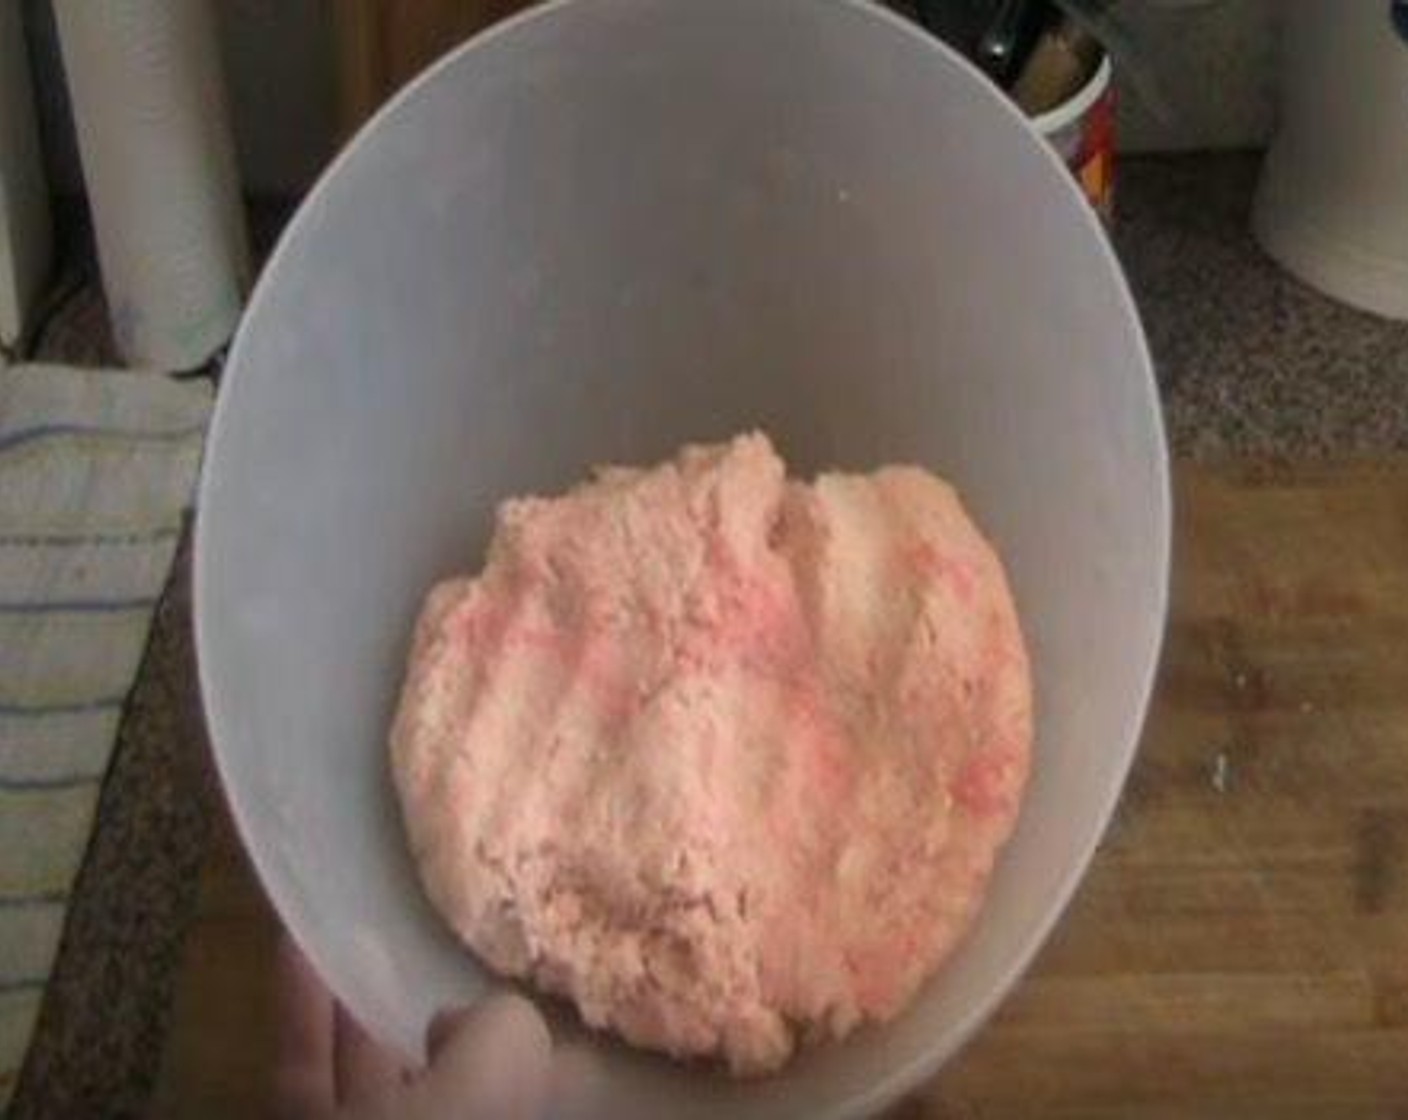 step 1 In a mixing bowl, add Powdered Confectioners Sugar (2 cups), Cream of Tartar (1/4 tsp), Vanilla Essence (1/2 tsp), and Sweetened Condensed Milk (1 1/3 cups). Stir to combine. Add Unsweetened Shredded Coconut (3 1/2 cups) and mix in. Add Red Food Coloring (3 dashes) and stir.